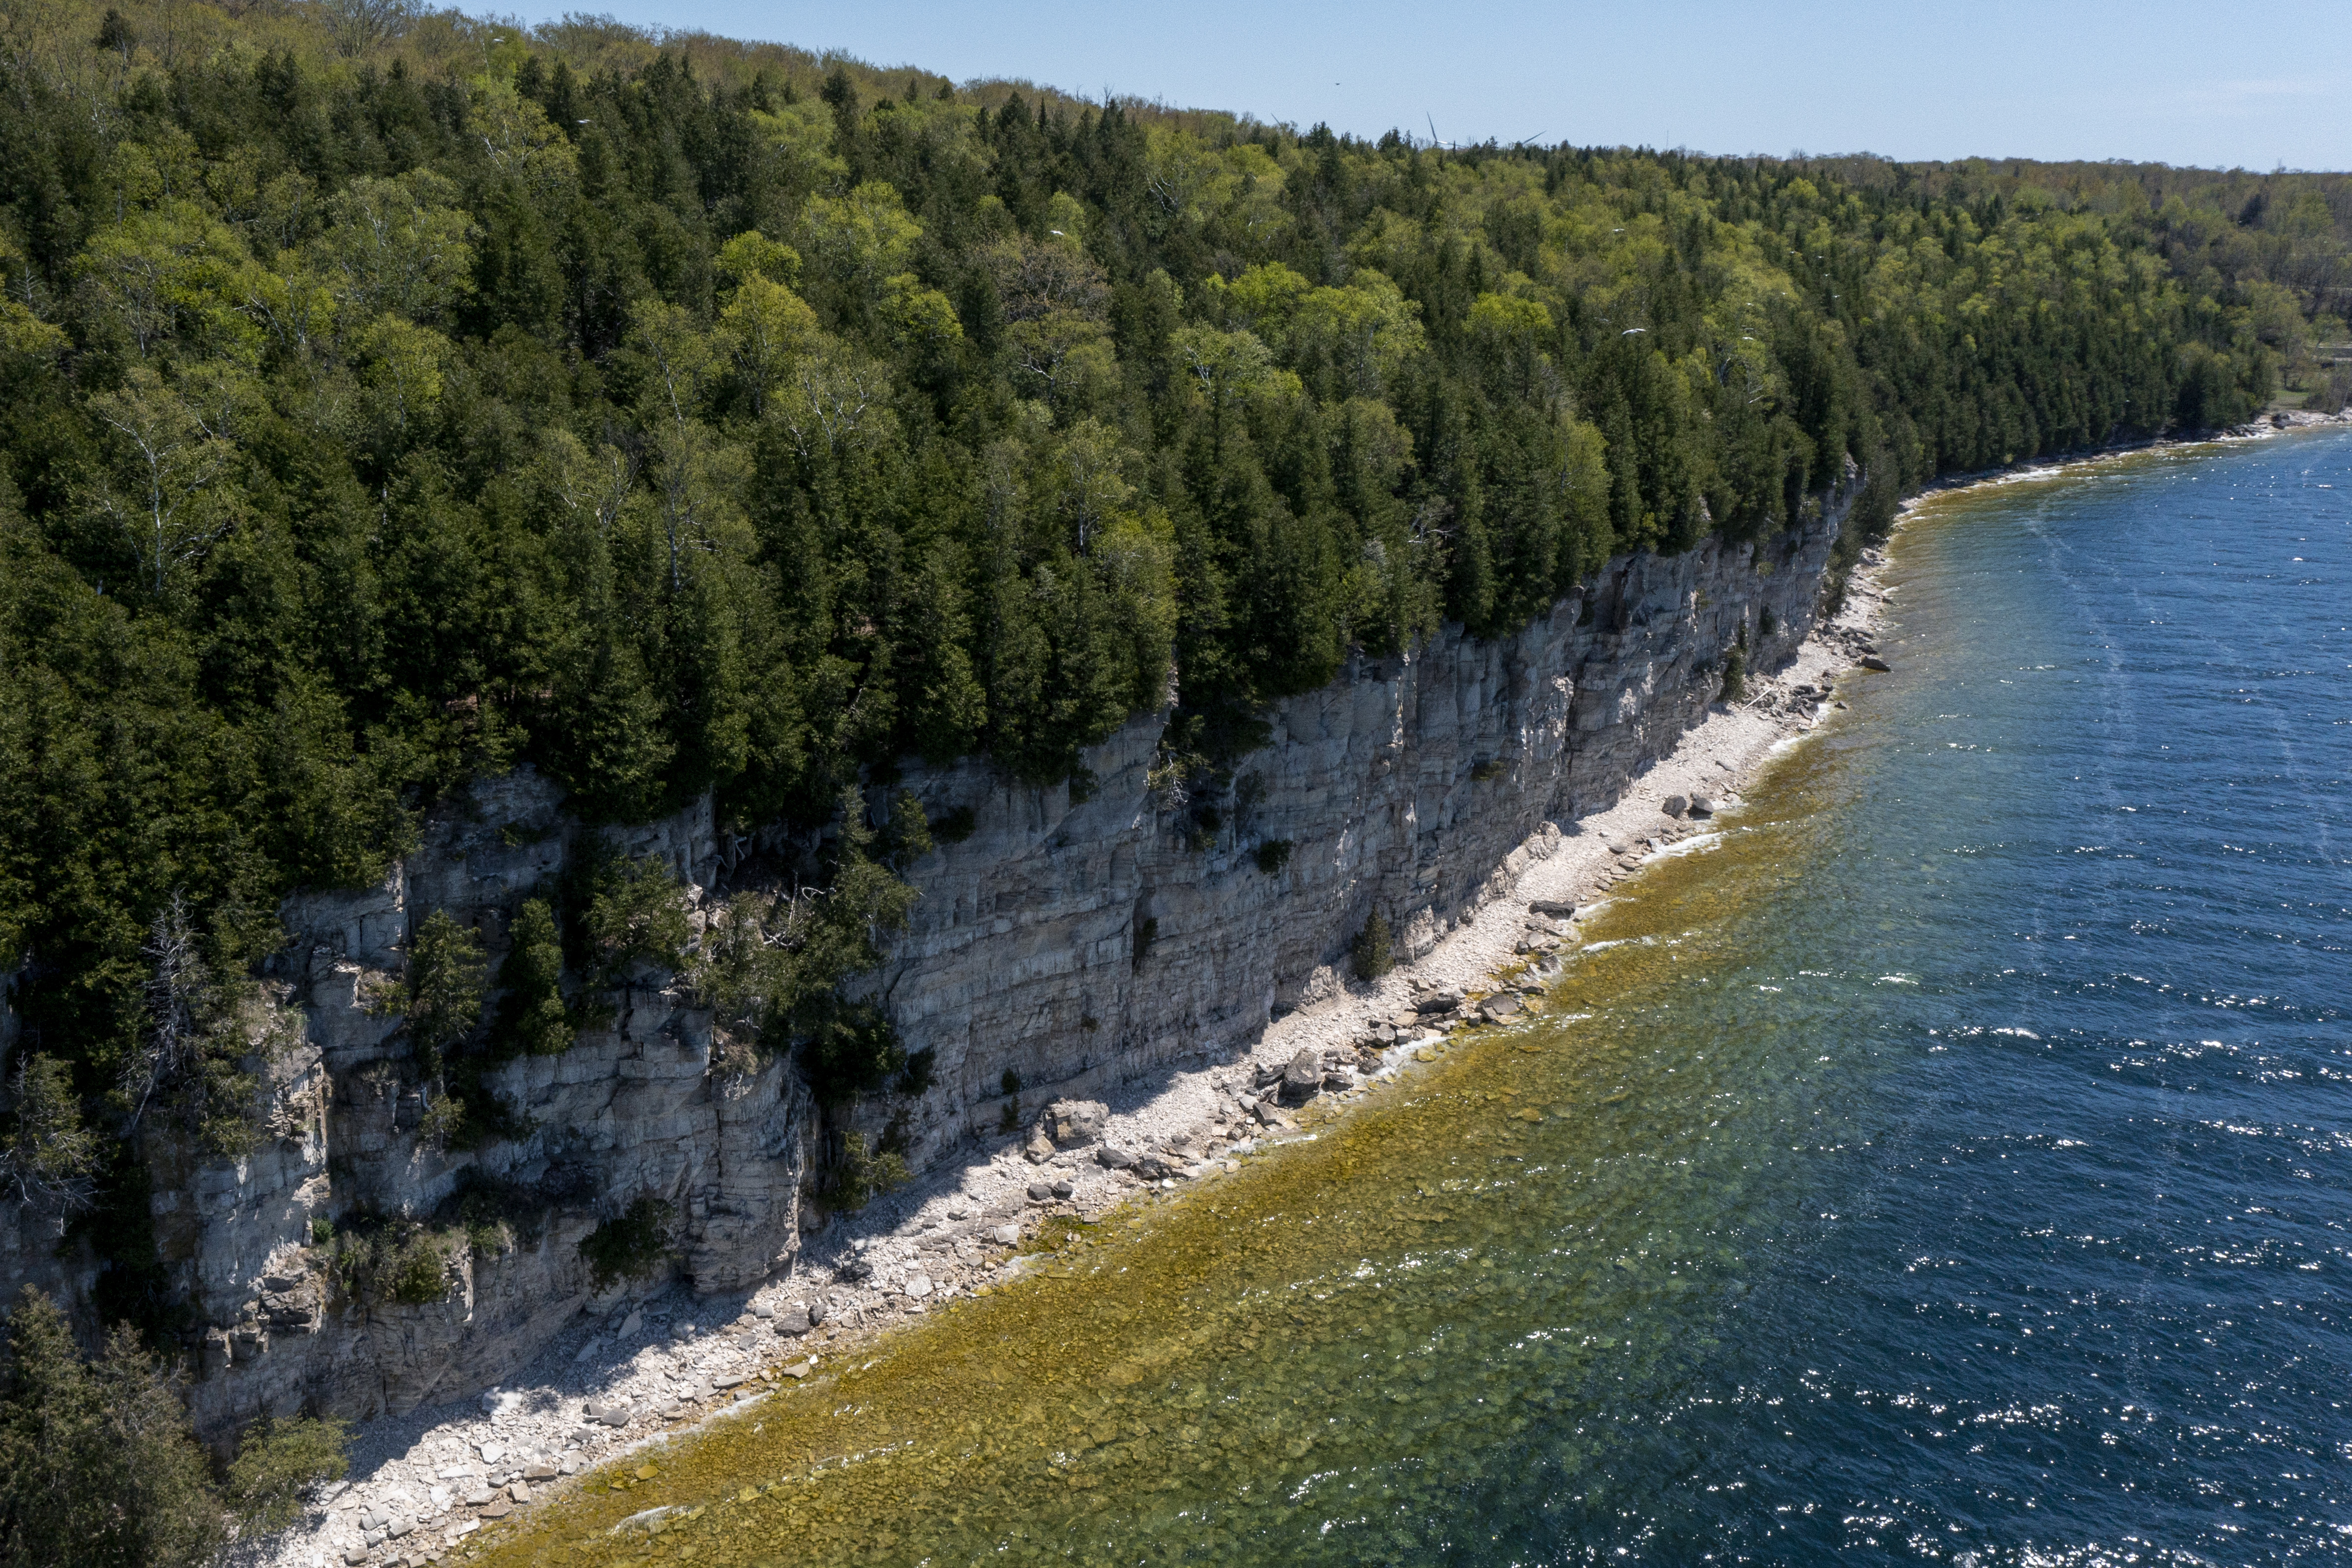 White dolomite limestone cliffs along Lake Michigan at Fayette Historic State Park near Garden on Tuesday, May 17, 2022. The scraggly white cedars growing from the cliff face are among the slowest-growing trees in the world and some are estimated to be more than 1,400 years old, according to research from the University of Guelph in Ontario. (Drone image by Cory Morse | MLive.com)
